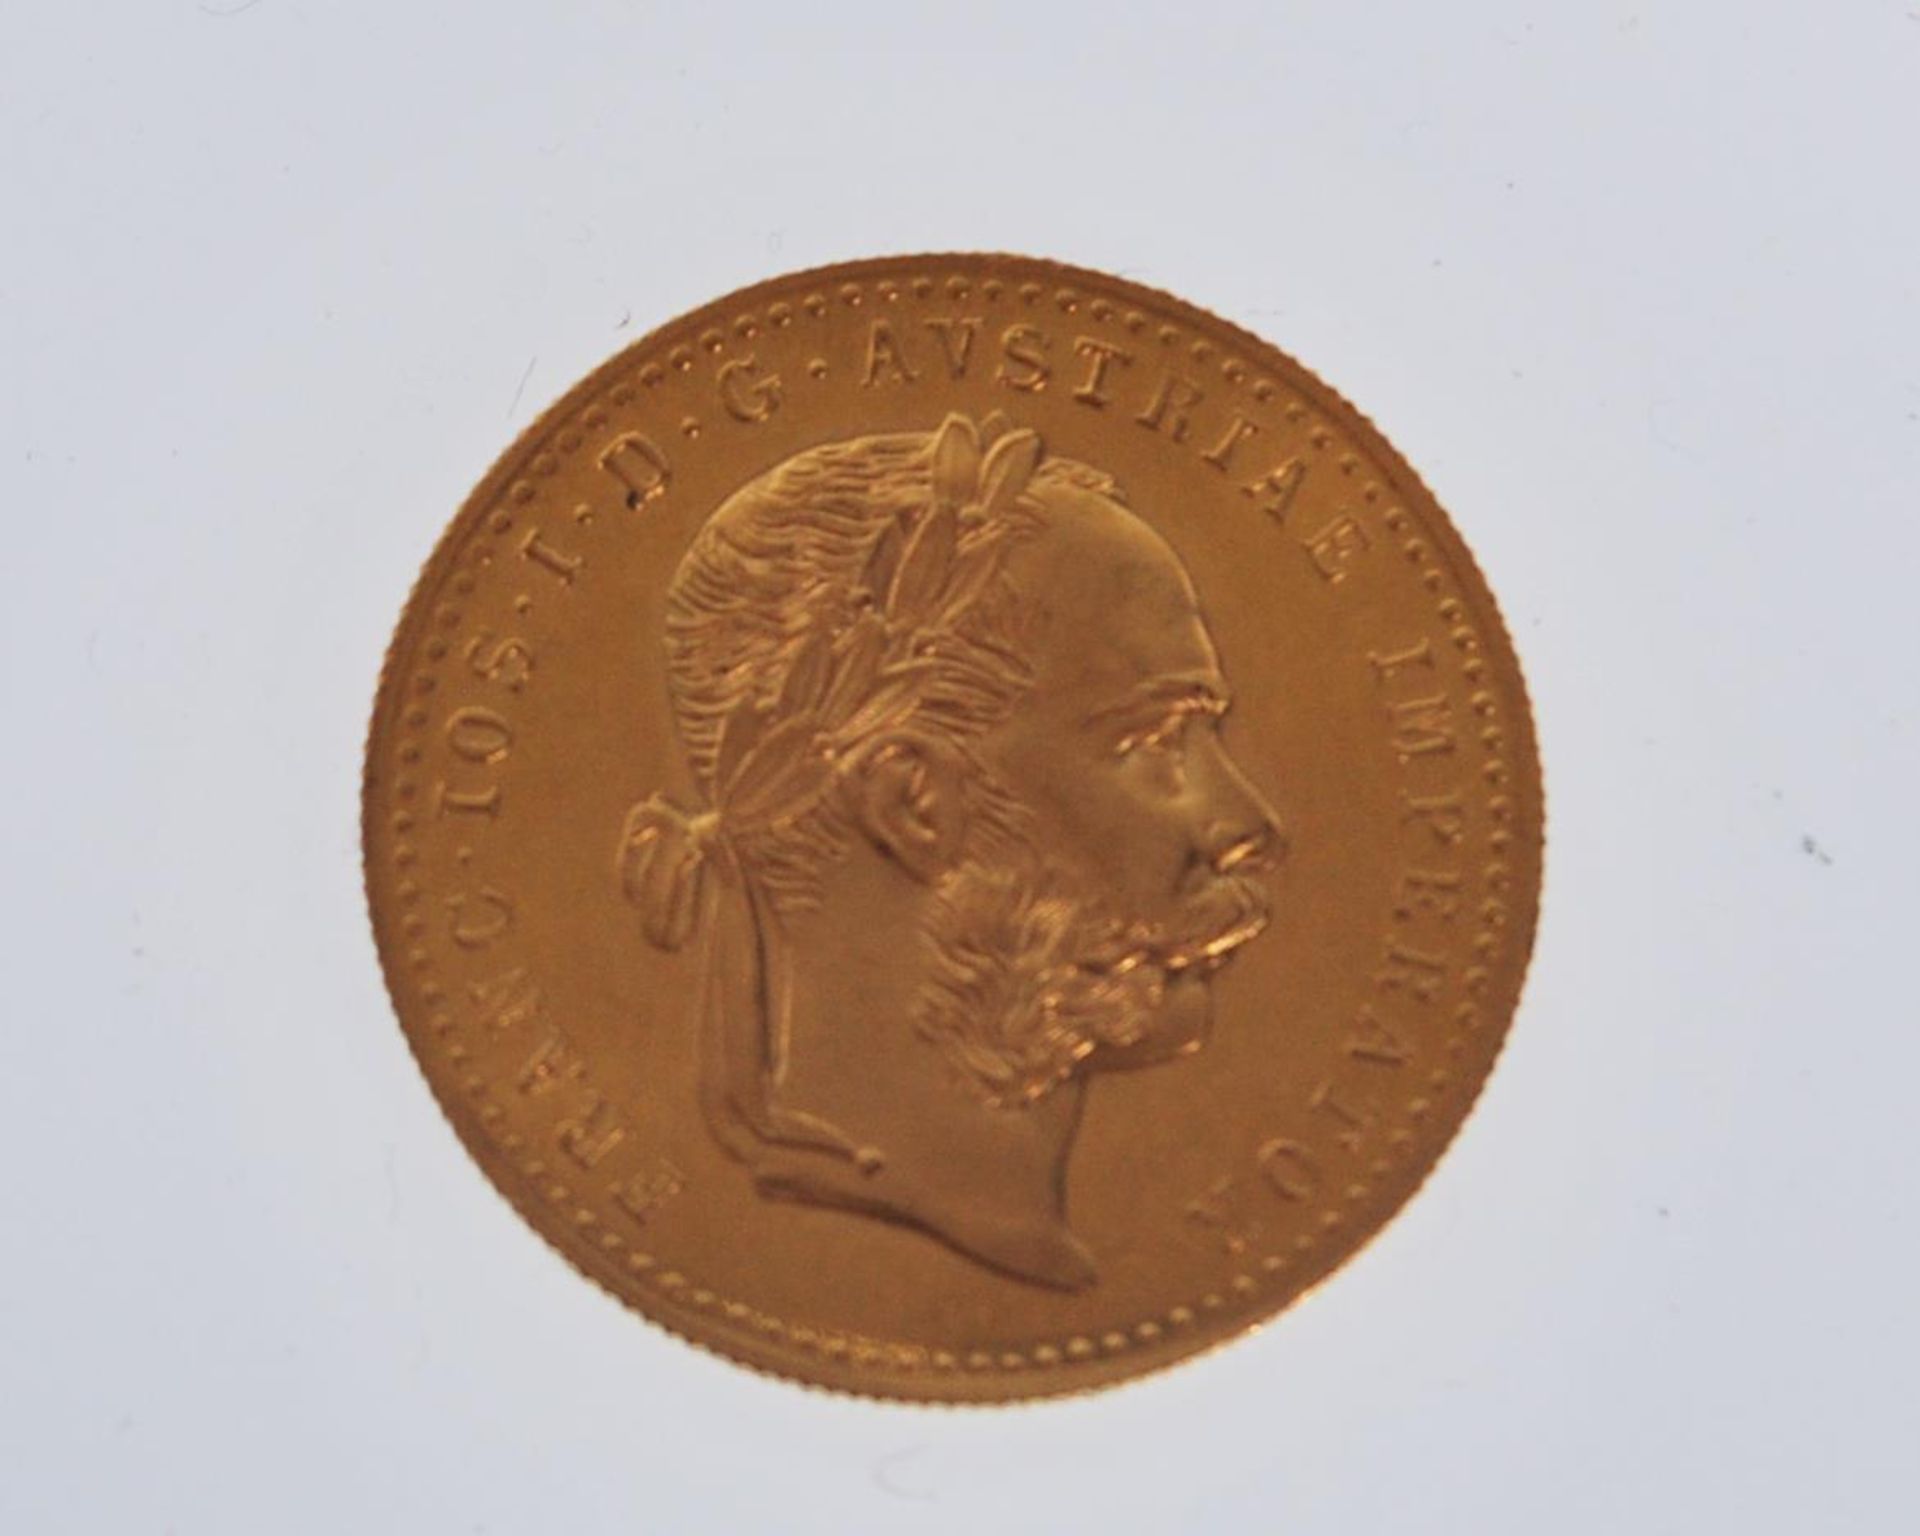 An 18ct gold Austrian 1 Ducat coin (restrike) having a head facing right and coat of arms to the